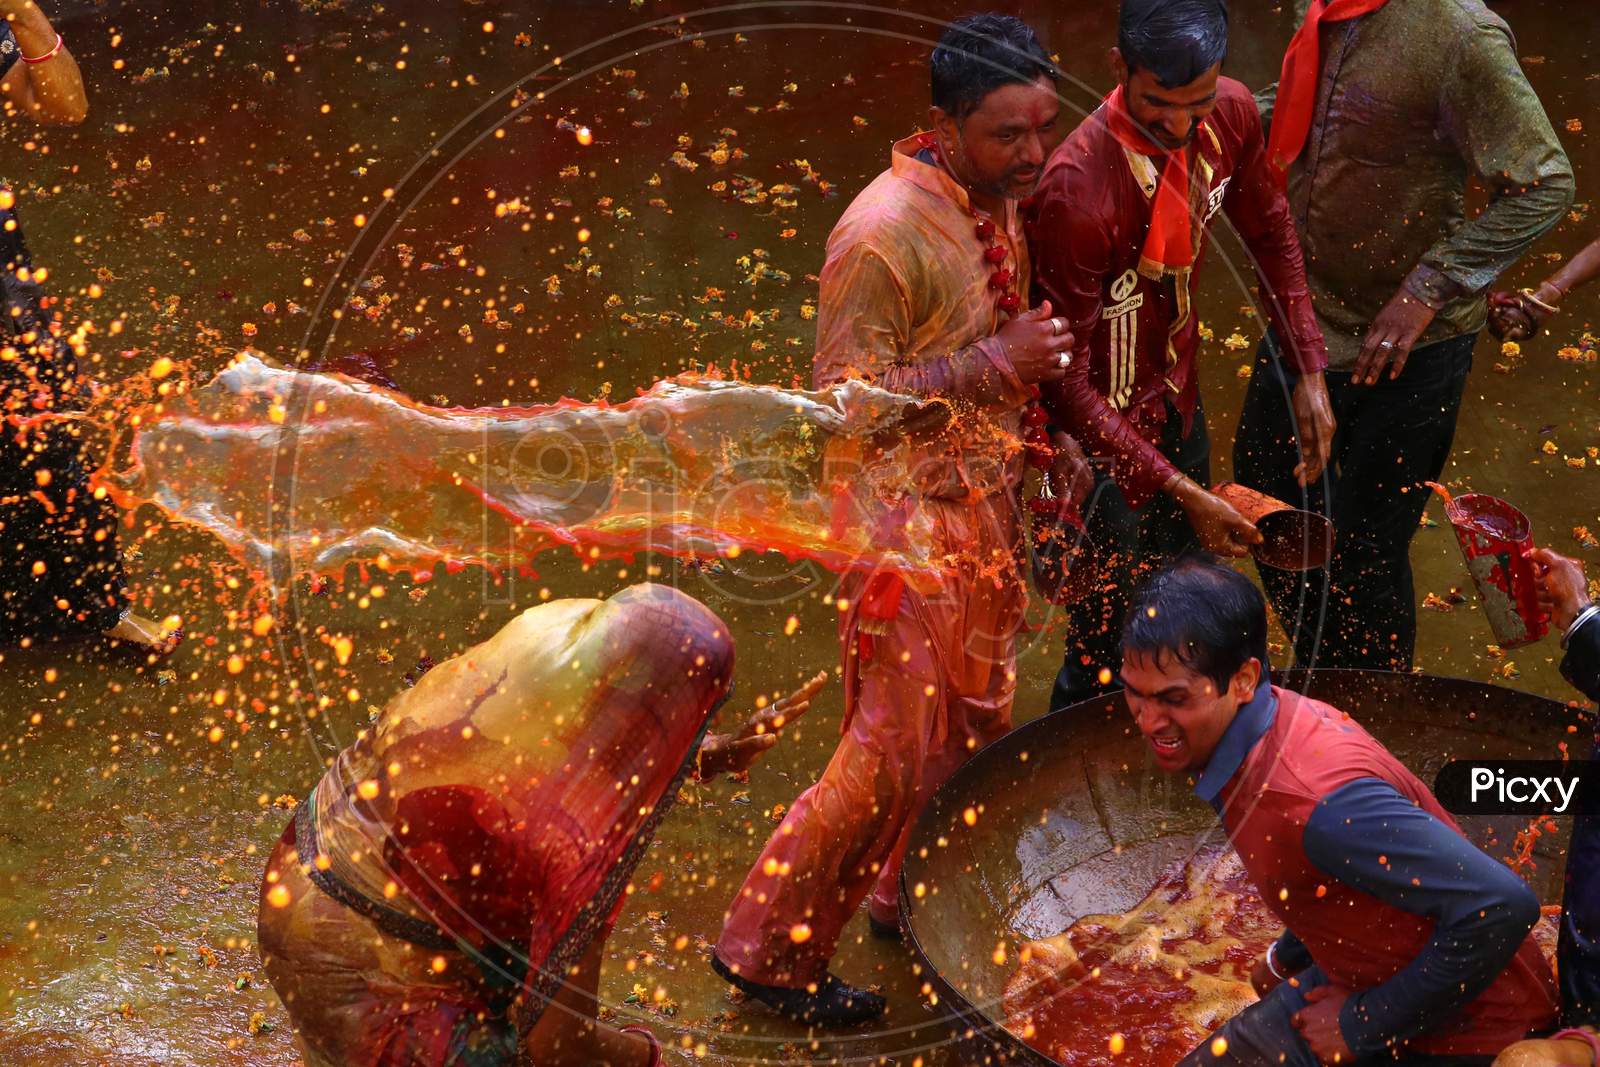 Men throw coloured water on women as they try to beat them with ropes made from cloth during "Kodamar" Holi as part of Holi, the Festival of Colours, celebrations in Beawar, Rajasthan, India on 11 March 2020.